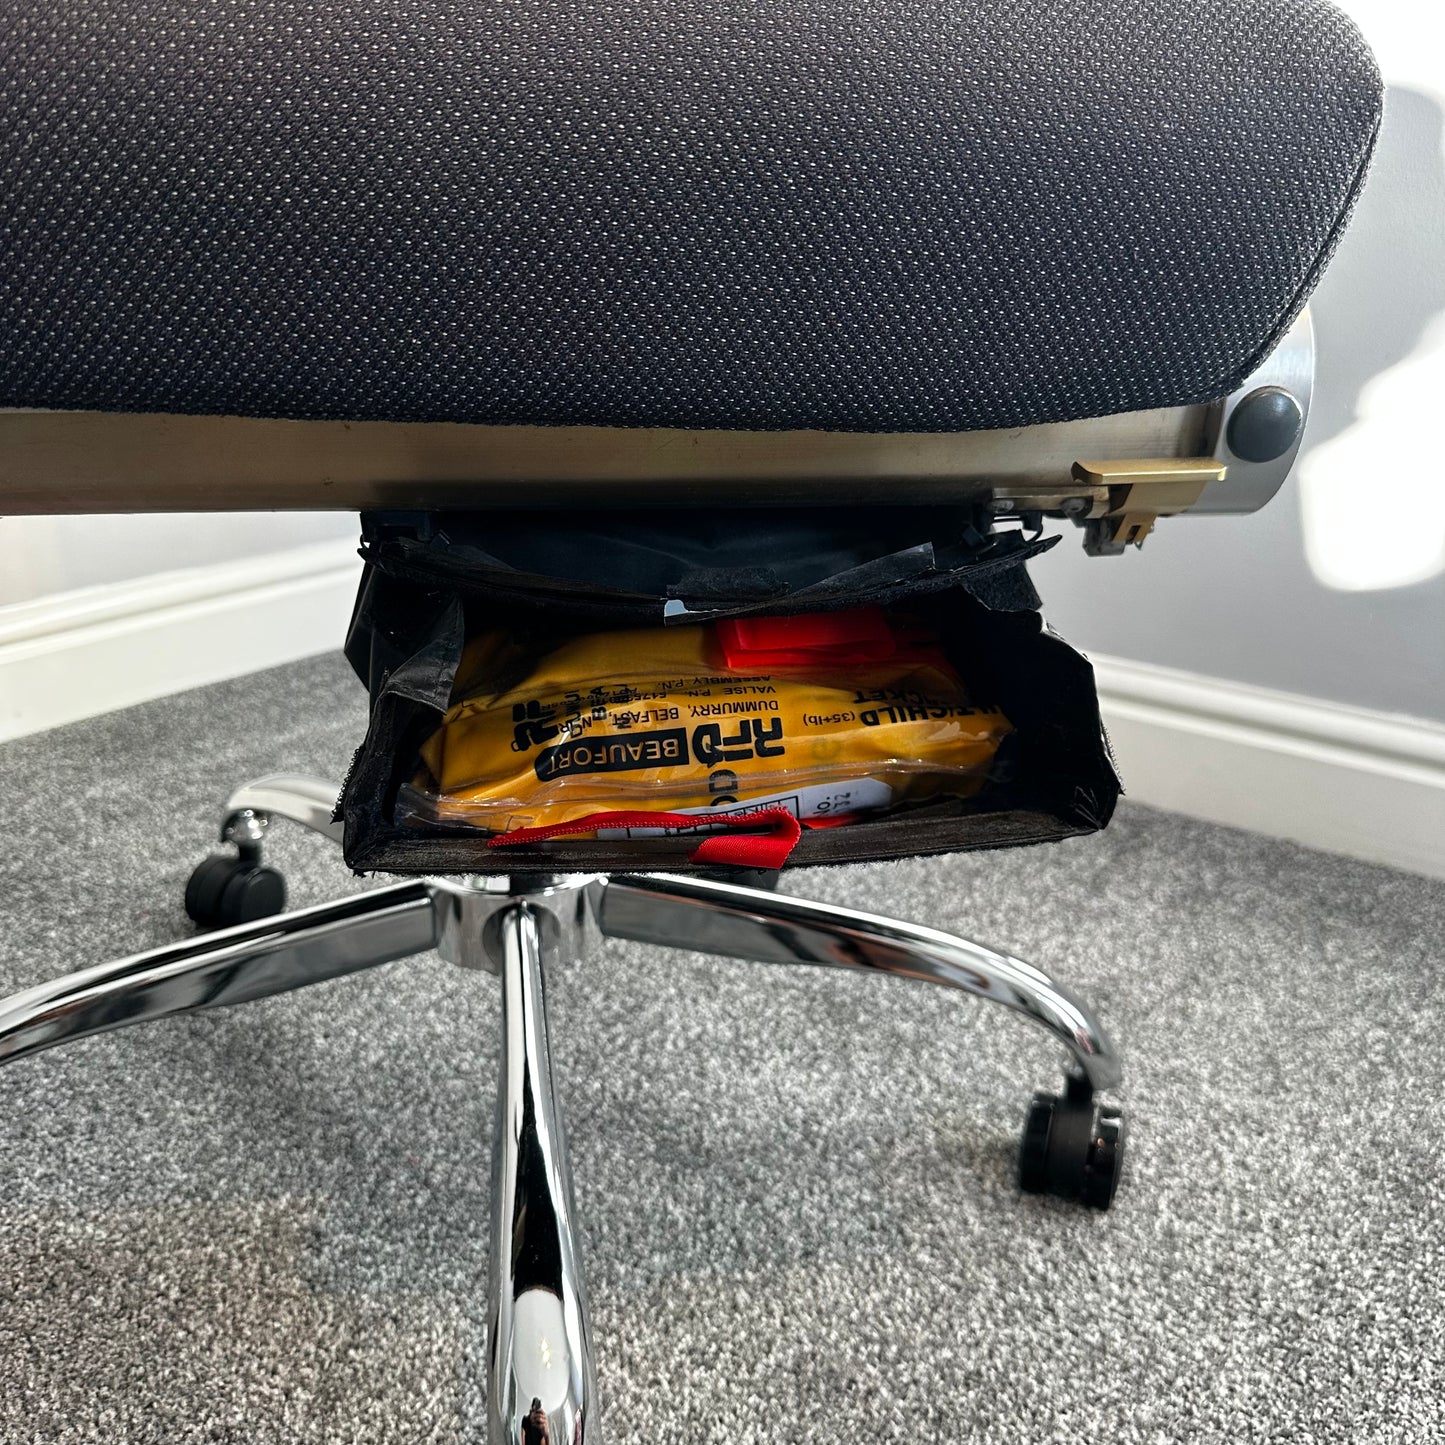 Thomas Cook Cabin Seat Upcycled Office Desk Chair